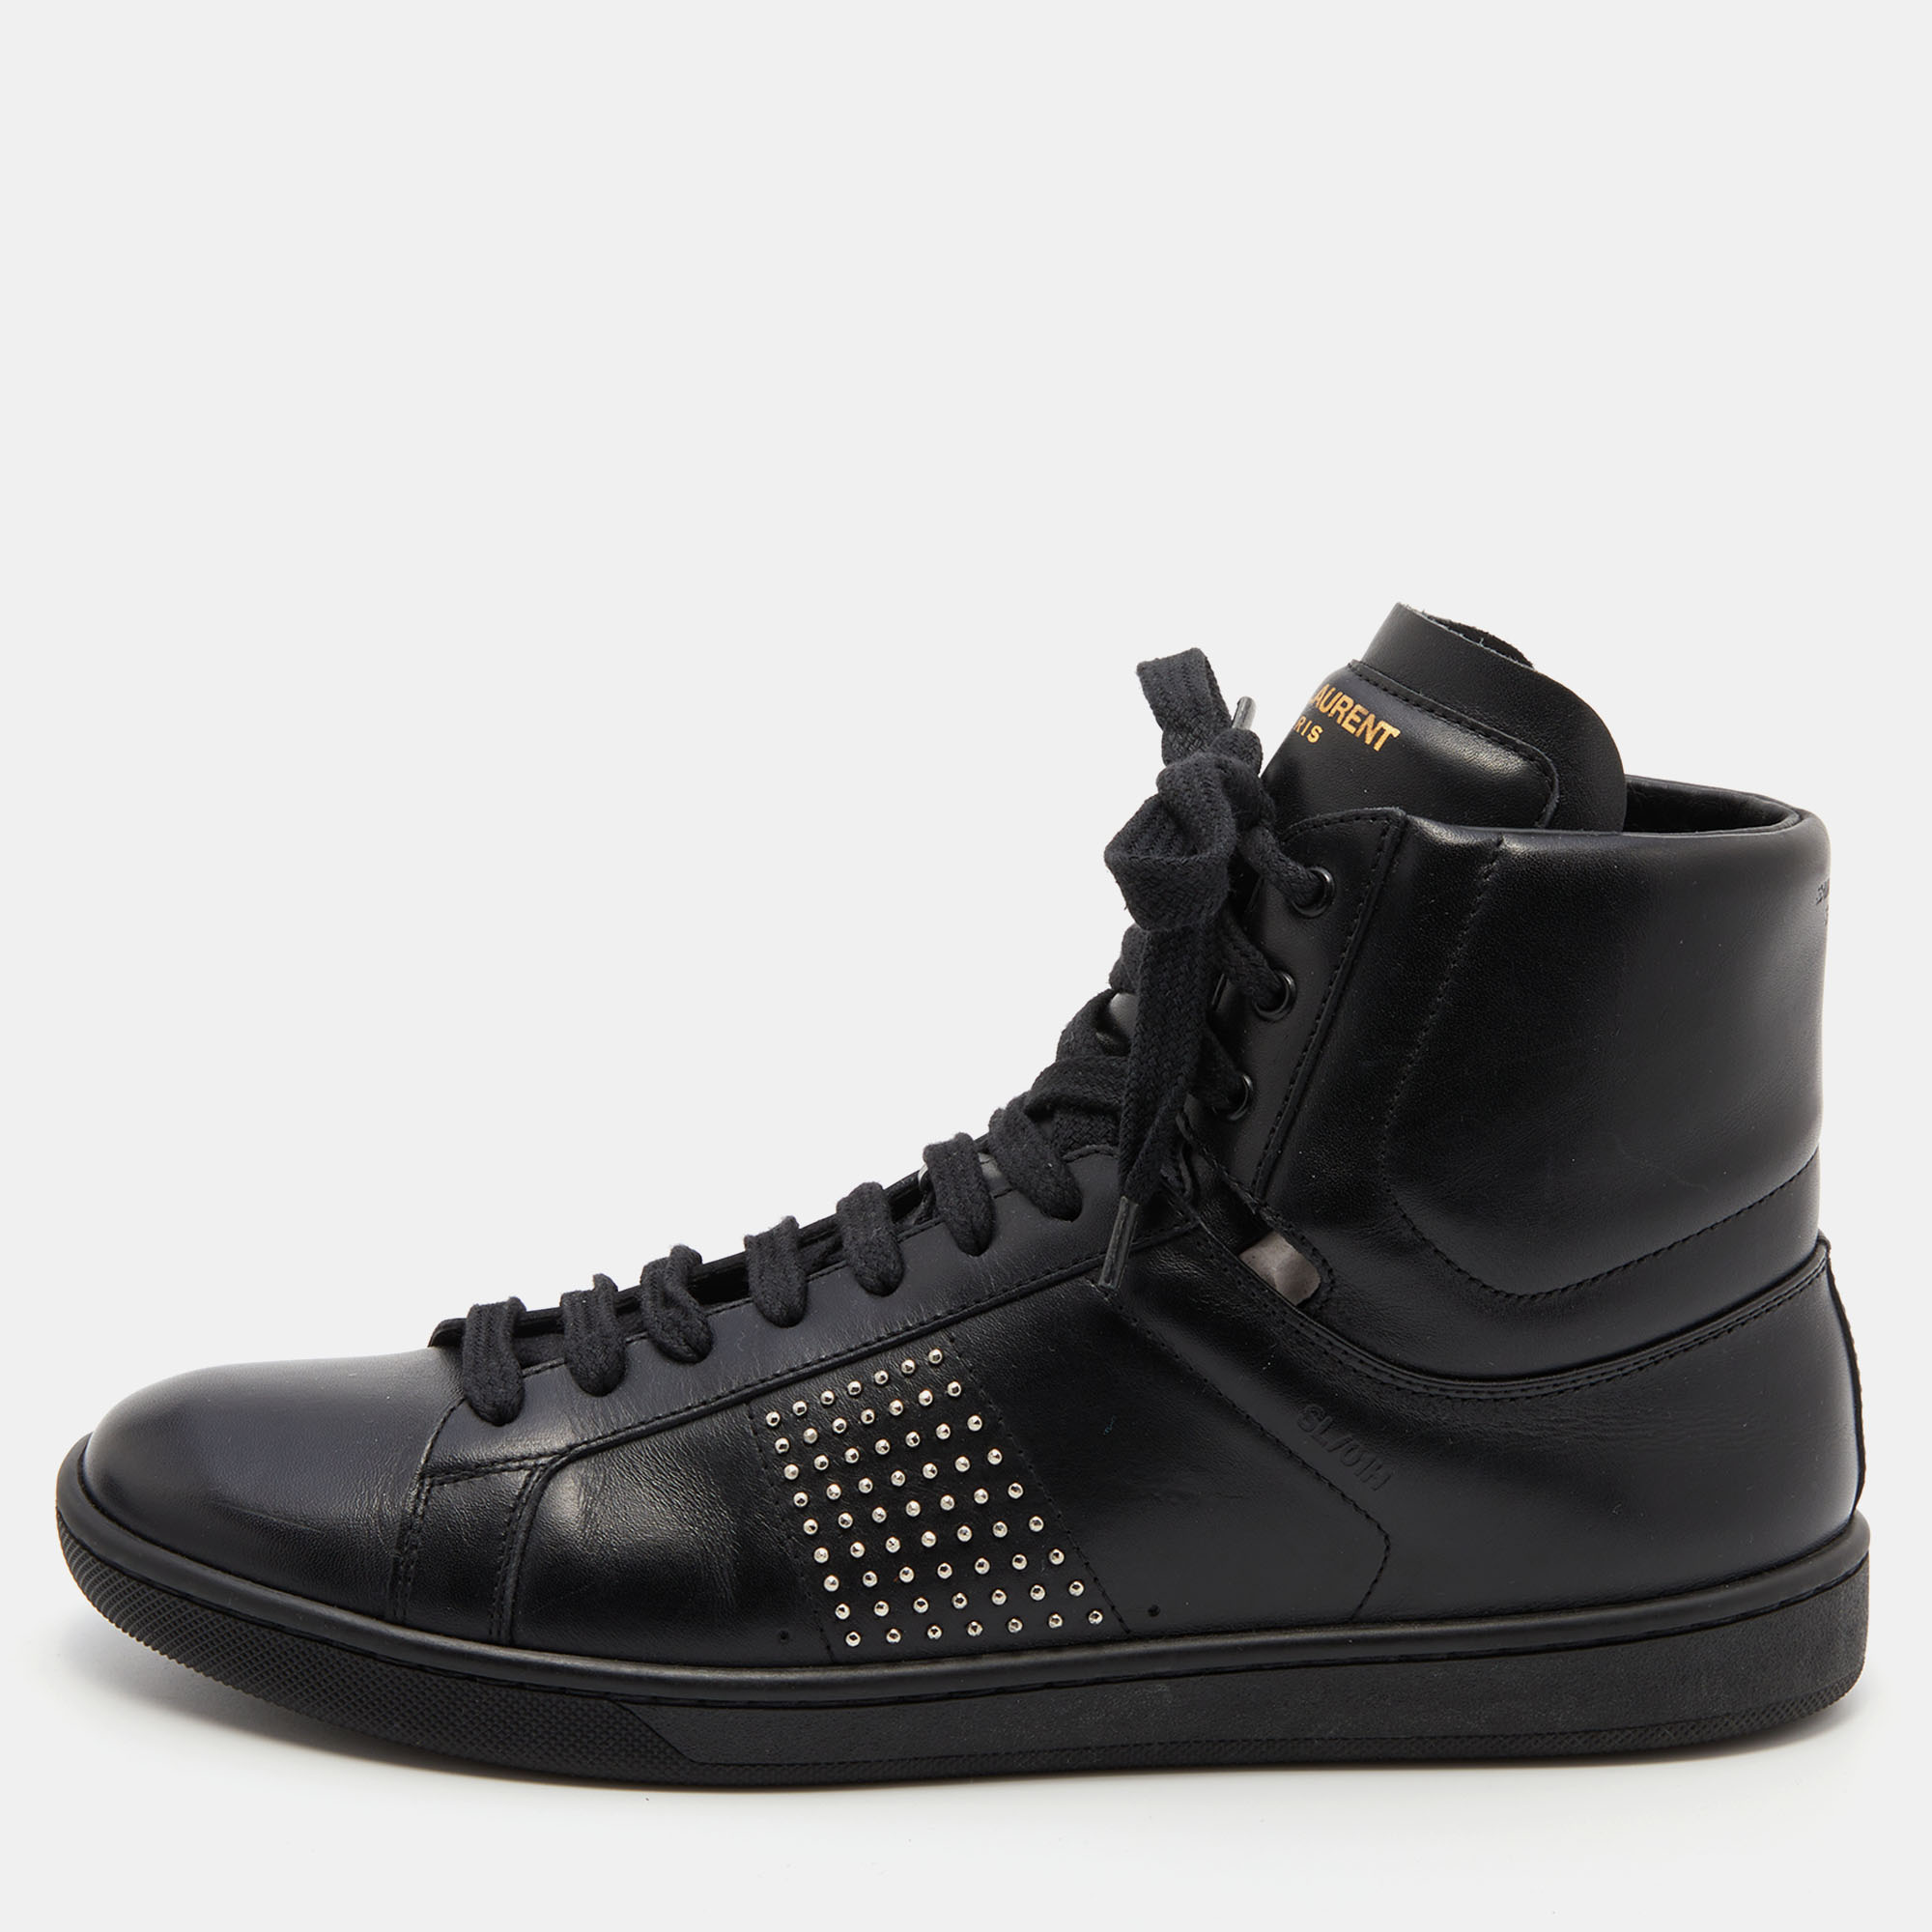 Pre-owned Saint Laurent Black Leather Studded High Top Sneakers Size 39